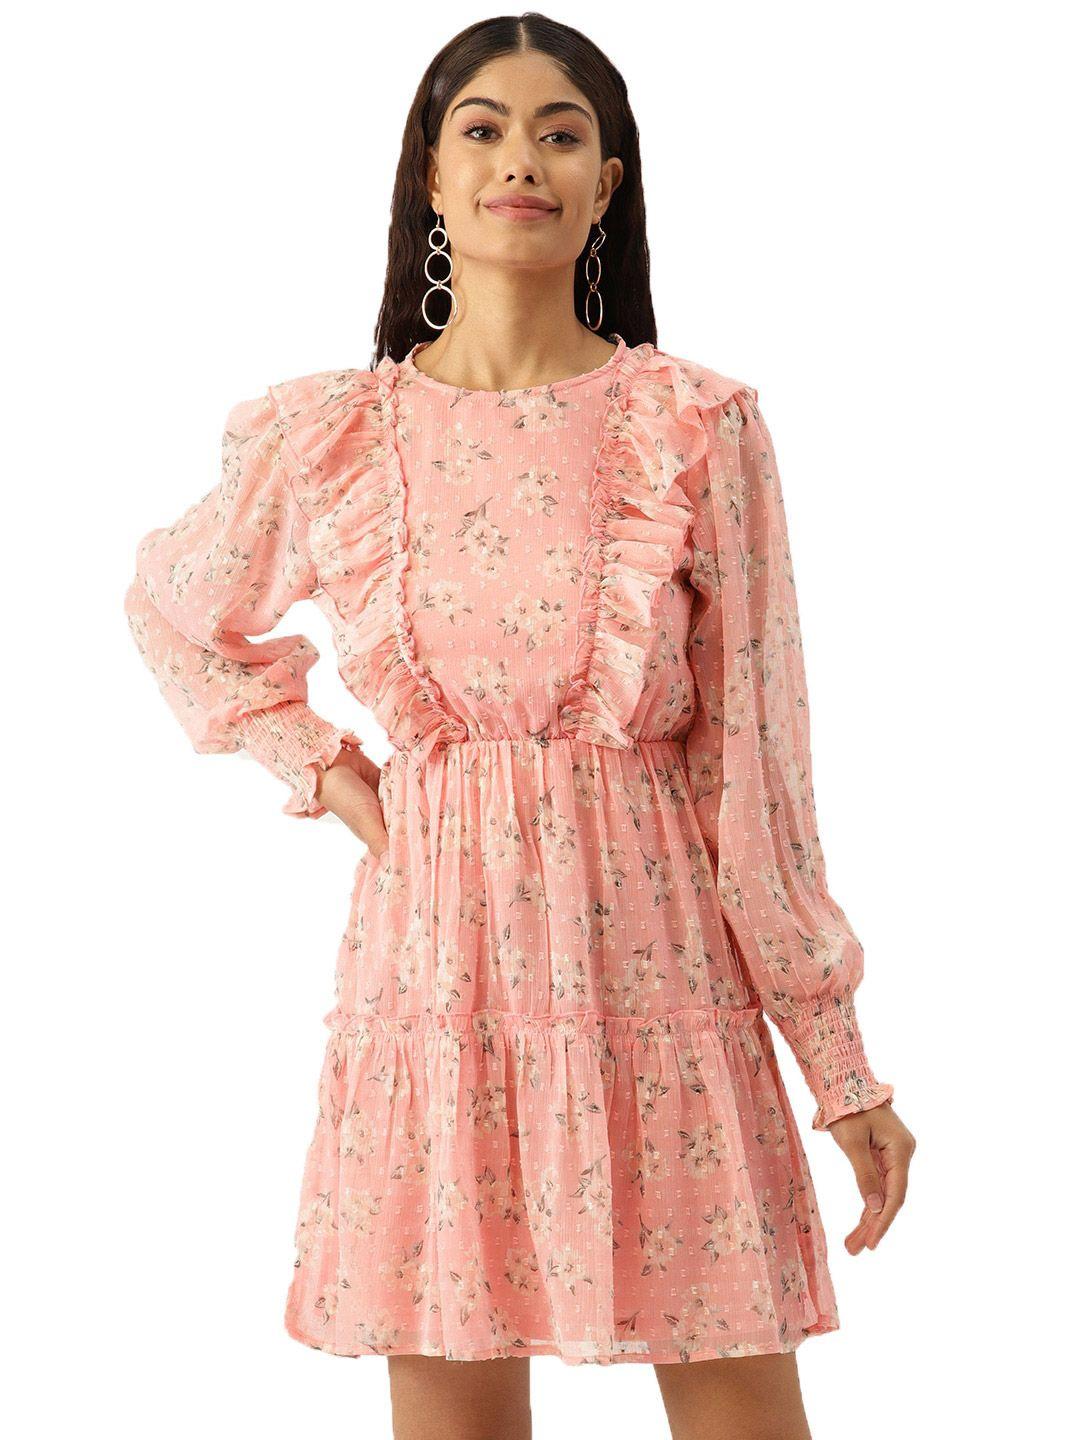 dressberry pink floral printed cuffed sleeves georgette tiered ruffled fit & flare dress